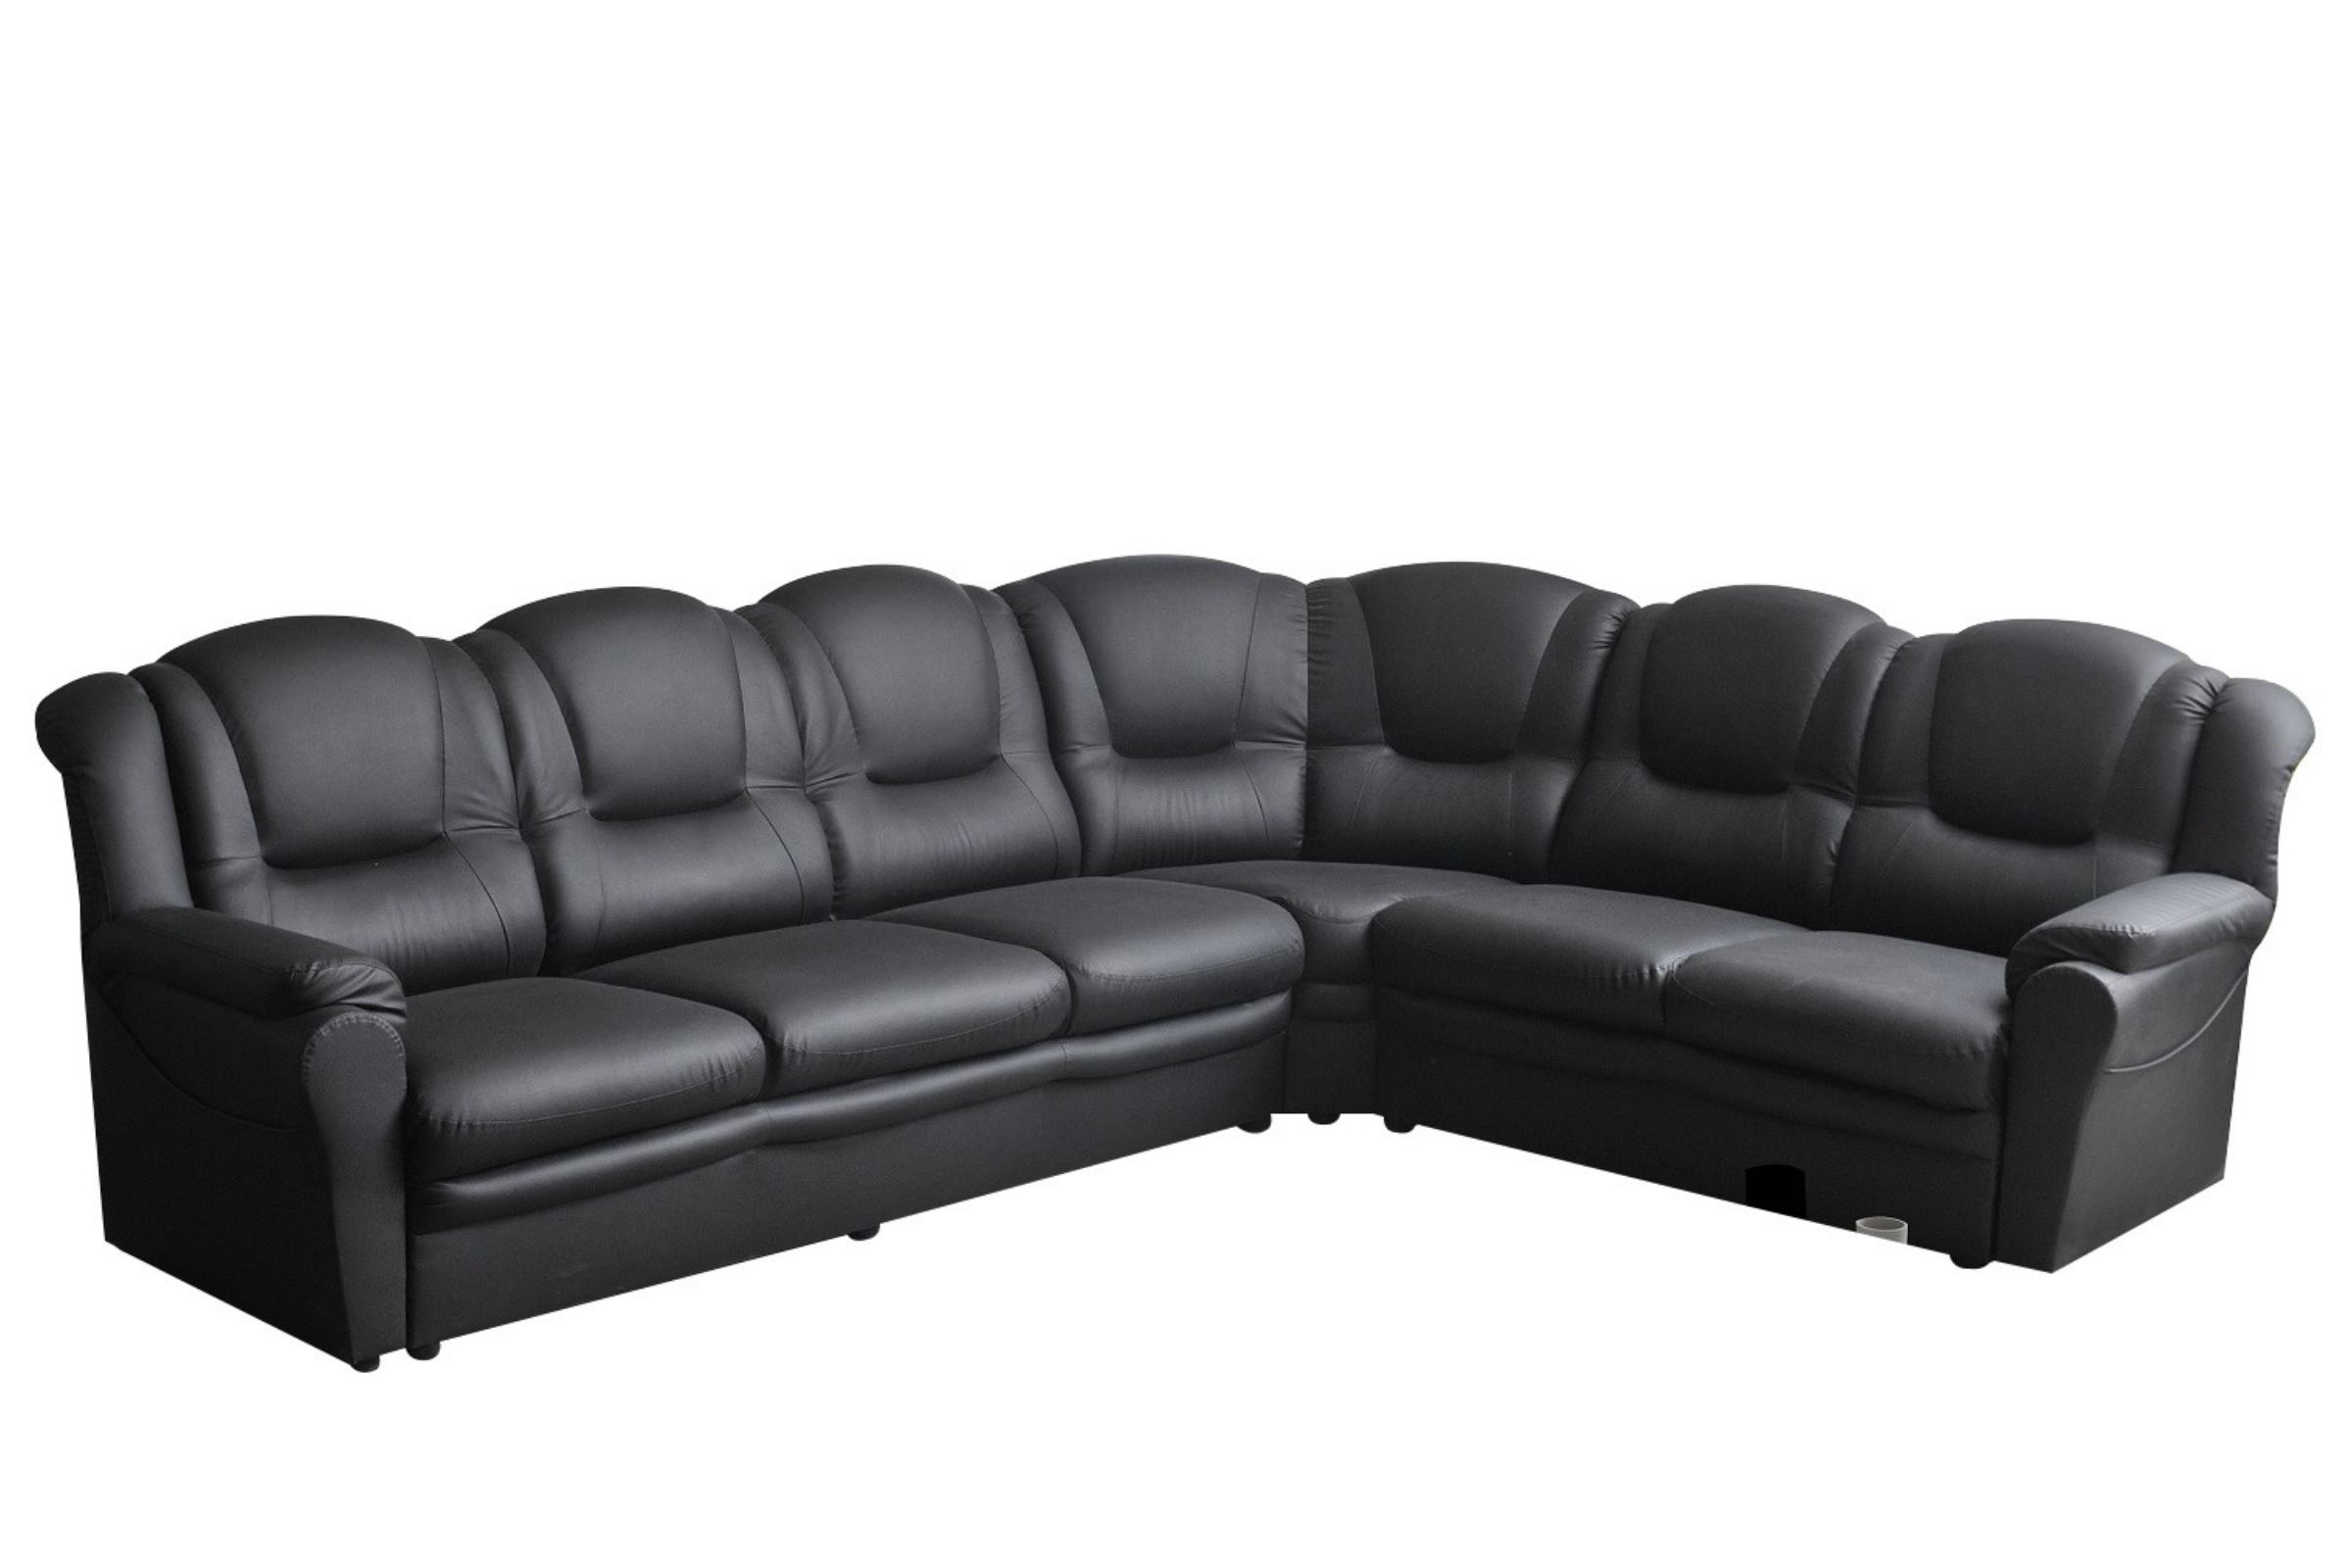 texas faux leather sofa bed review